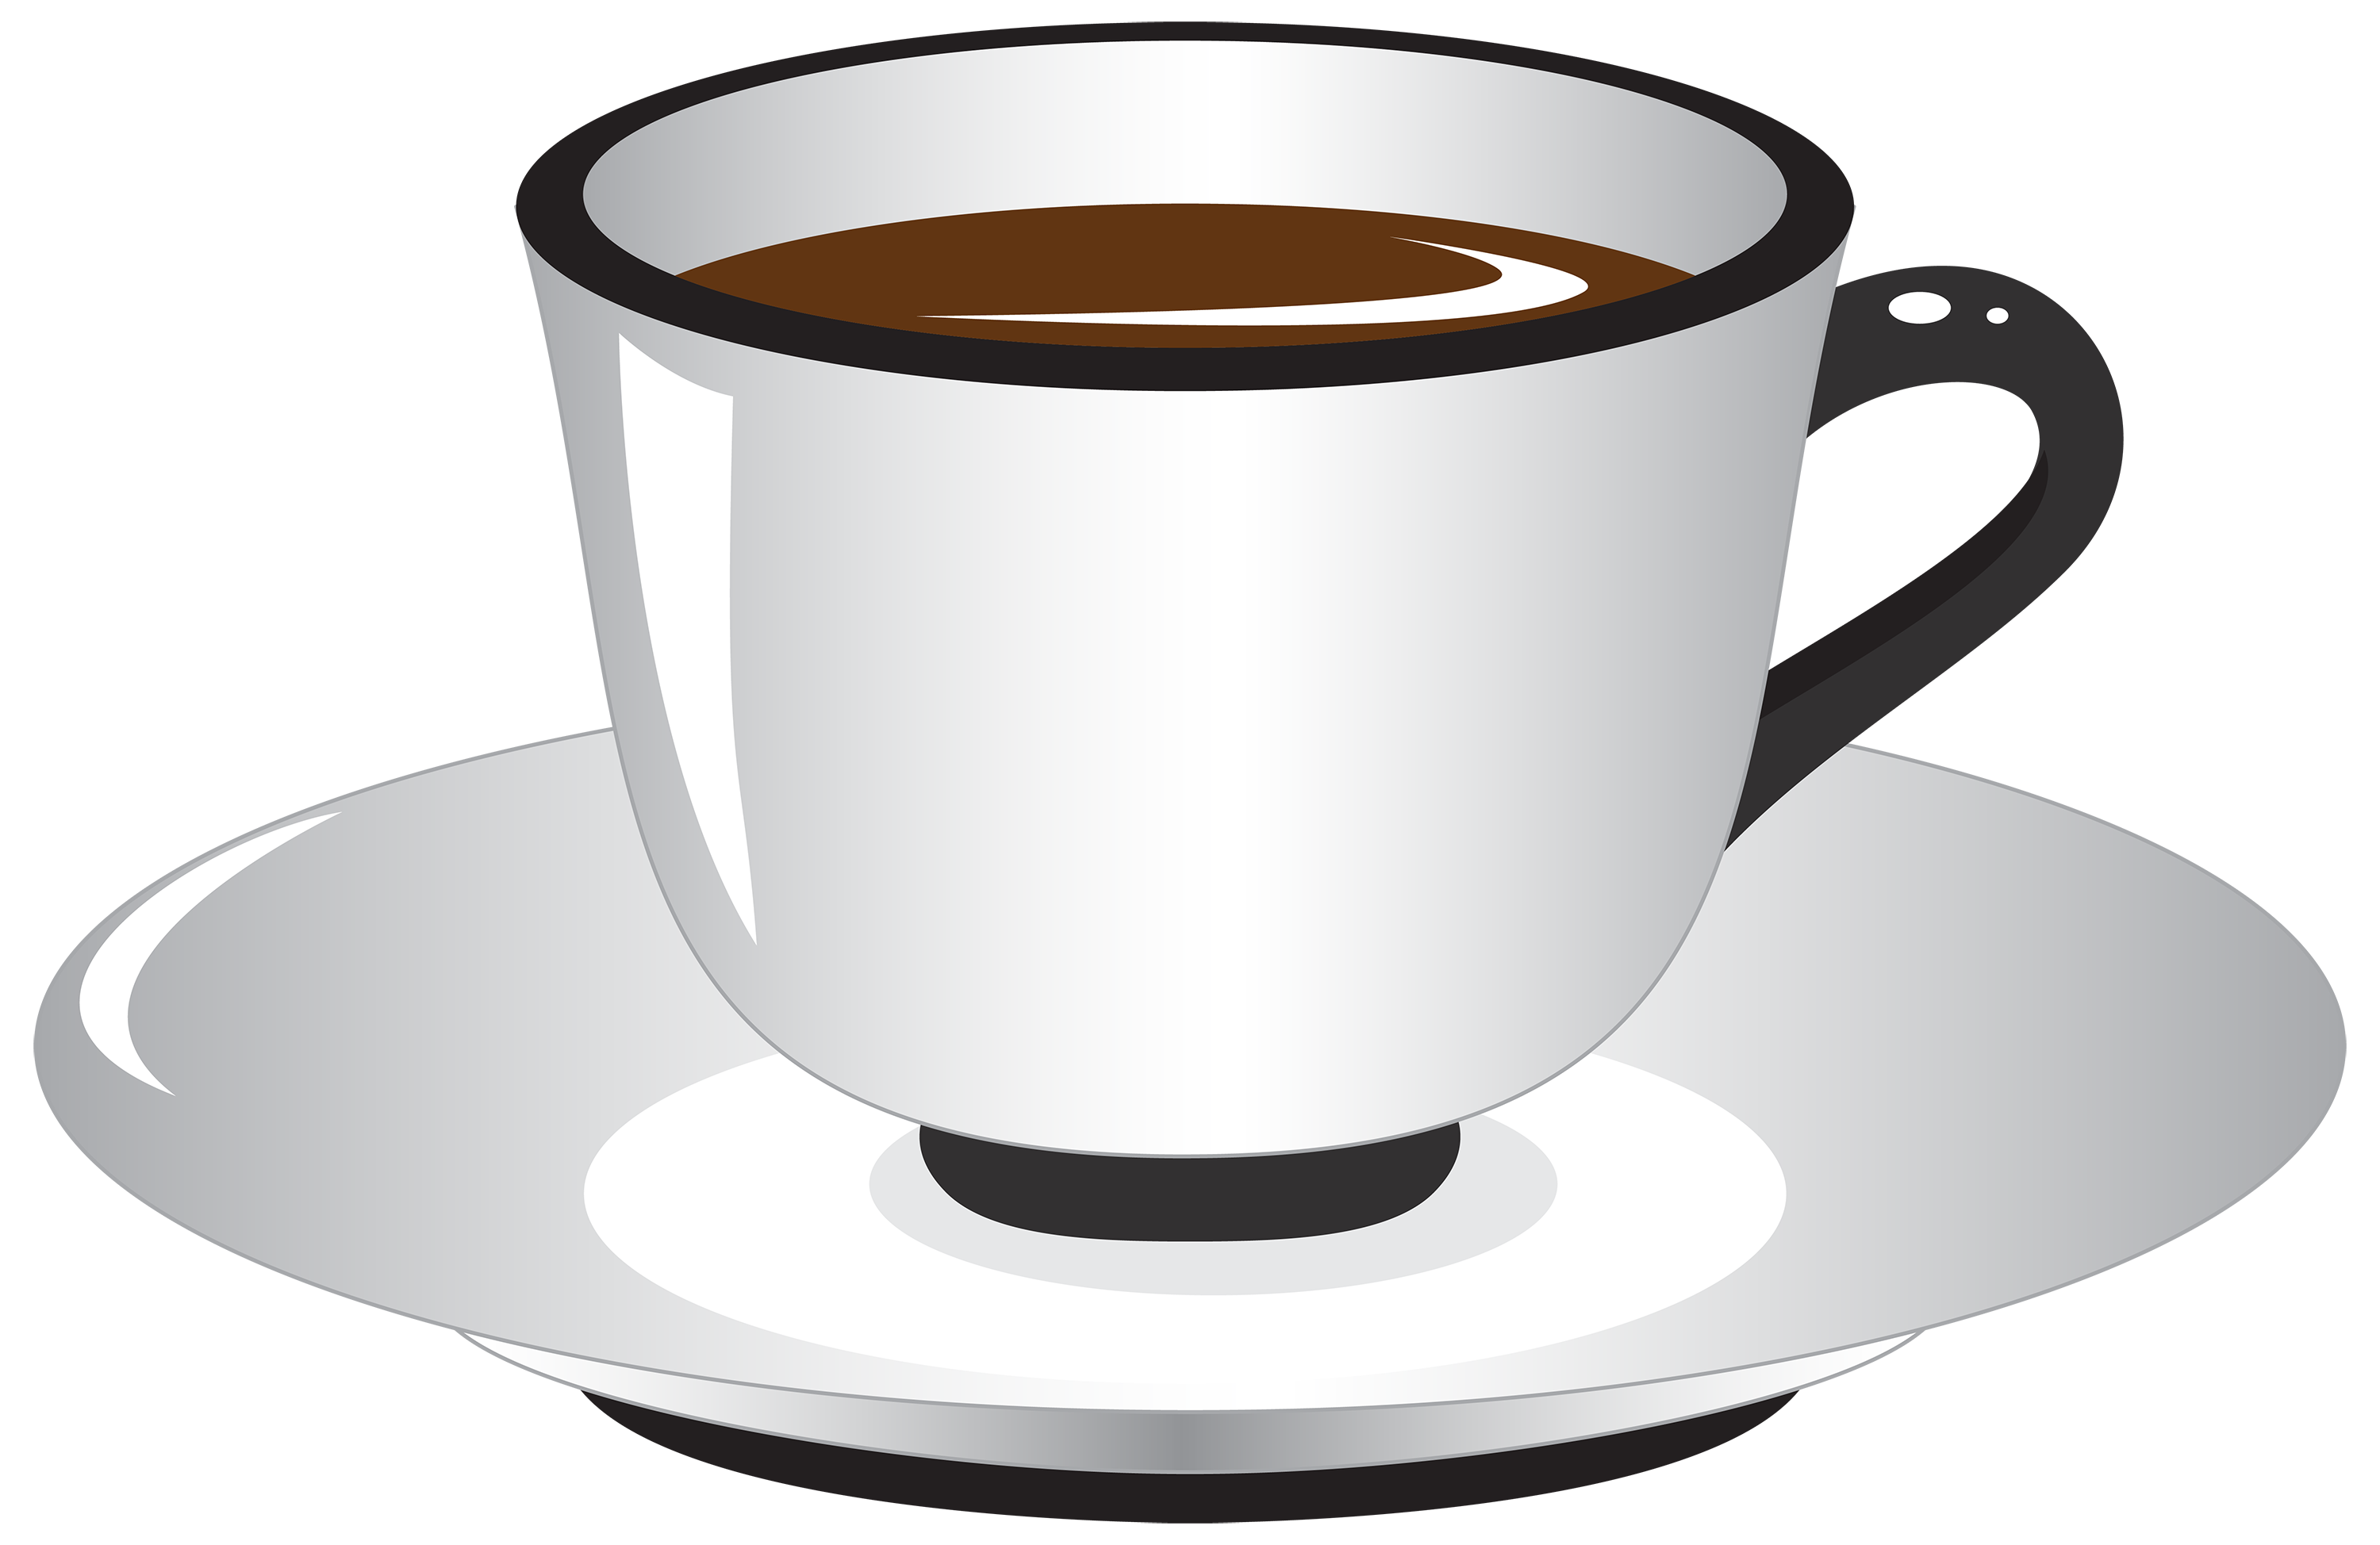 Coffee cup coffee mug clip art free vector for free download about